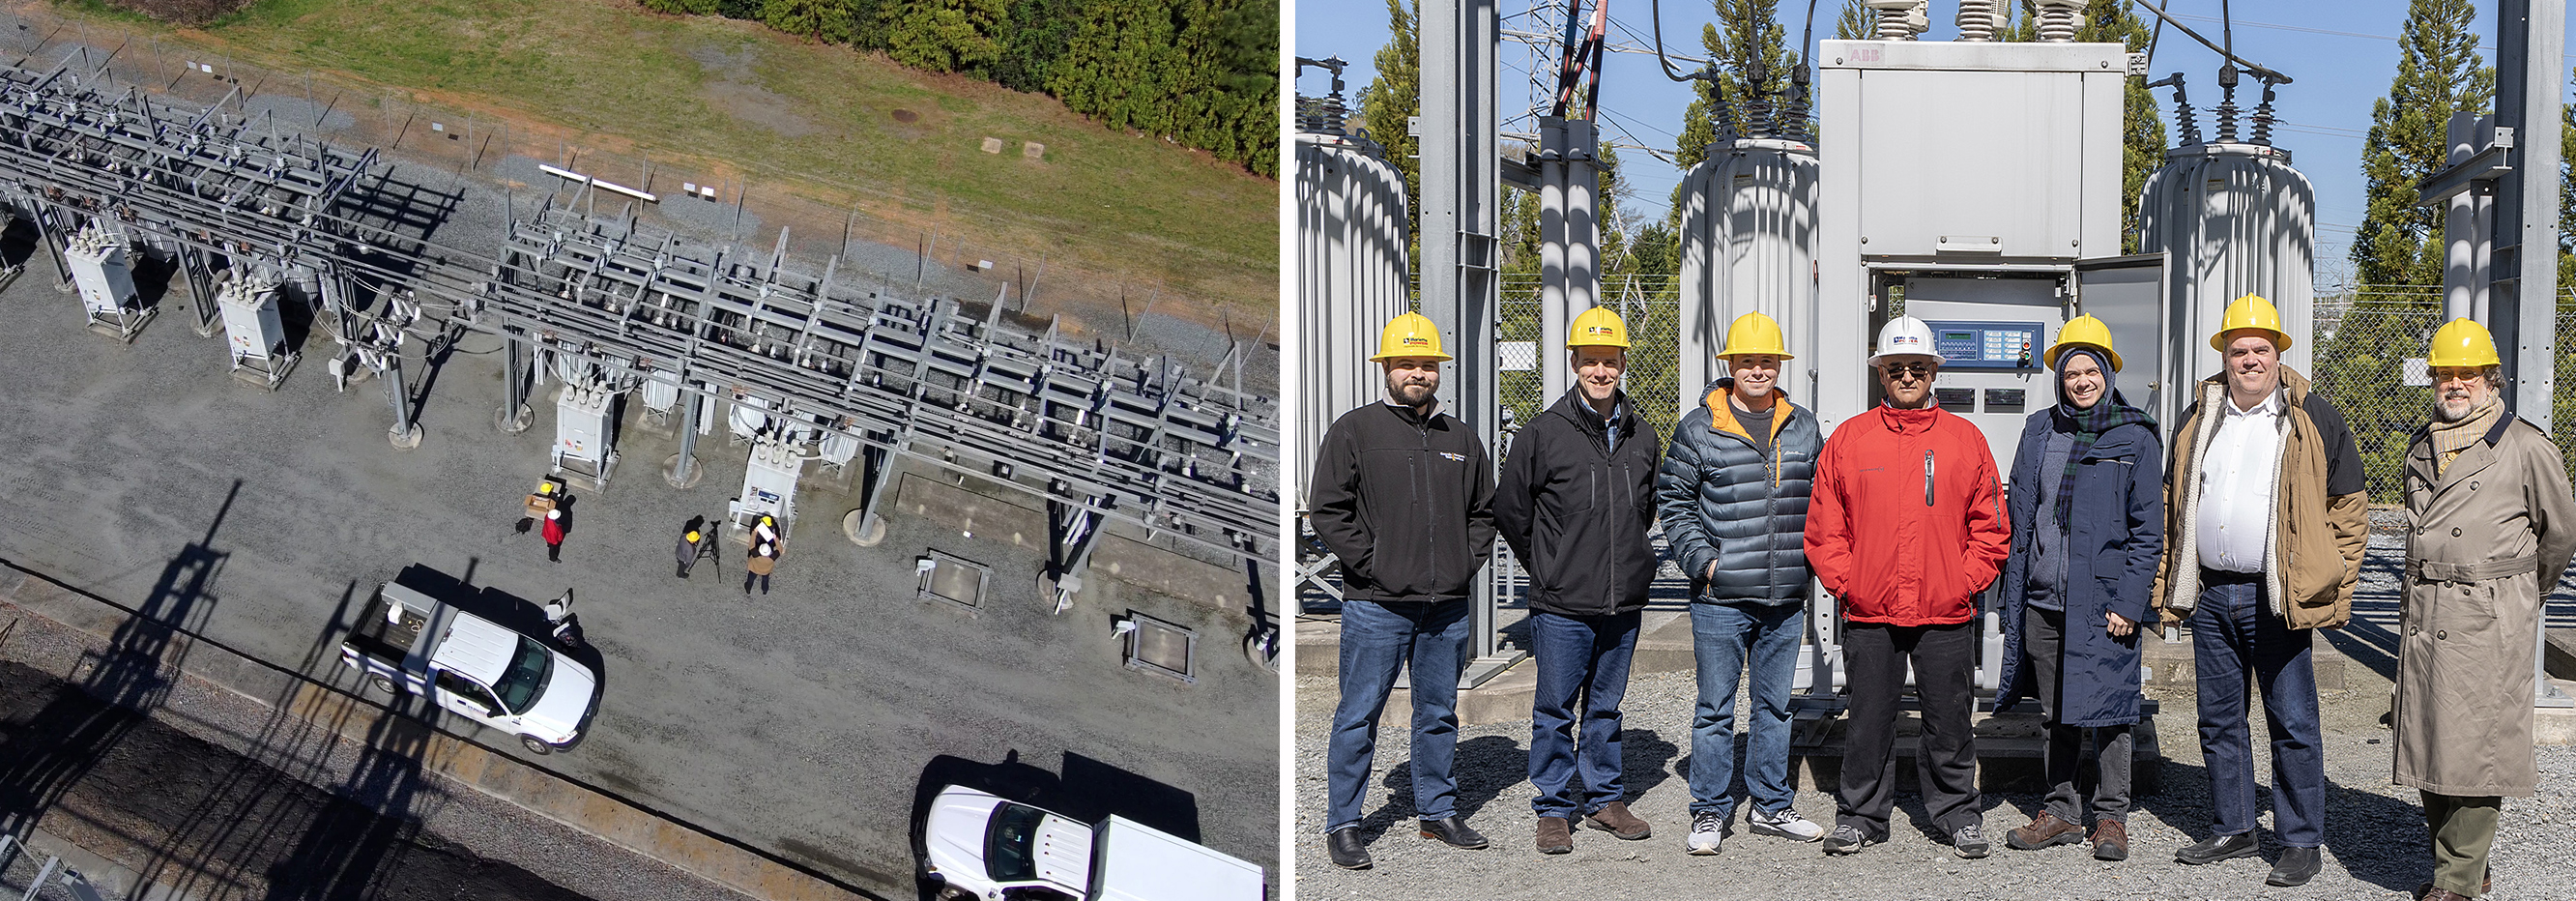 Two photos side by side. One is drone view of electrical substation. The other is a group of researchers standing outdoors in front of electrical equipment.